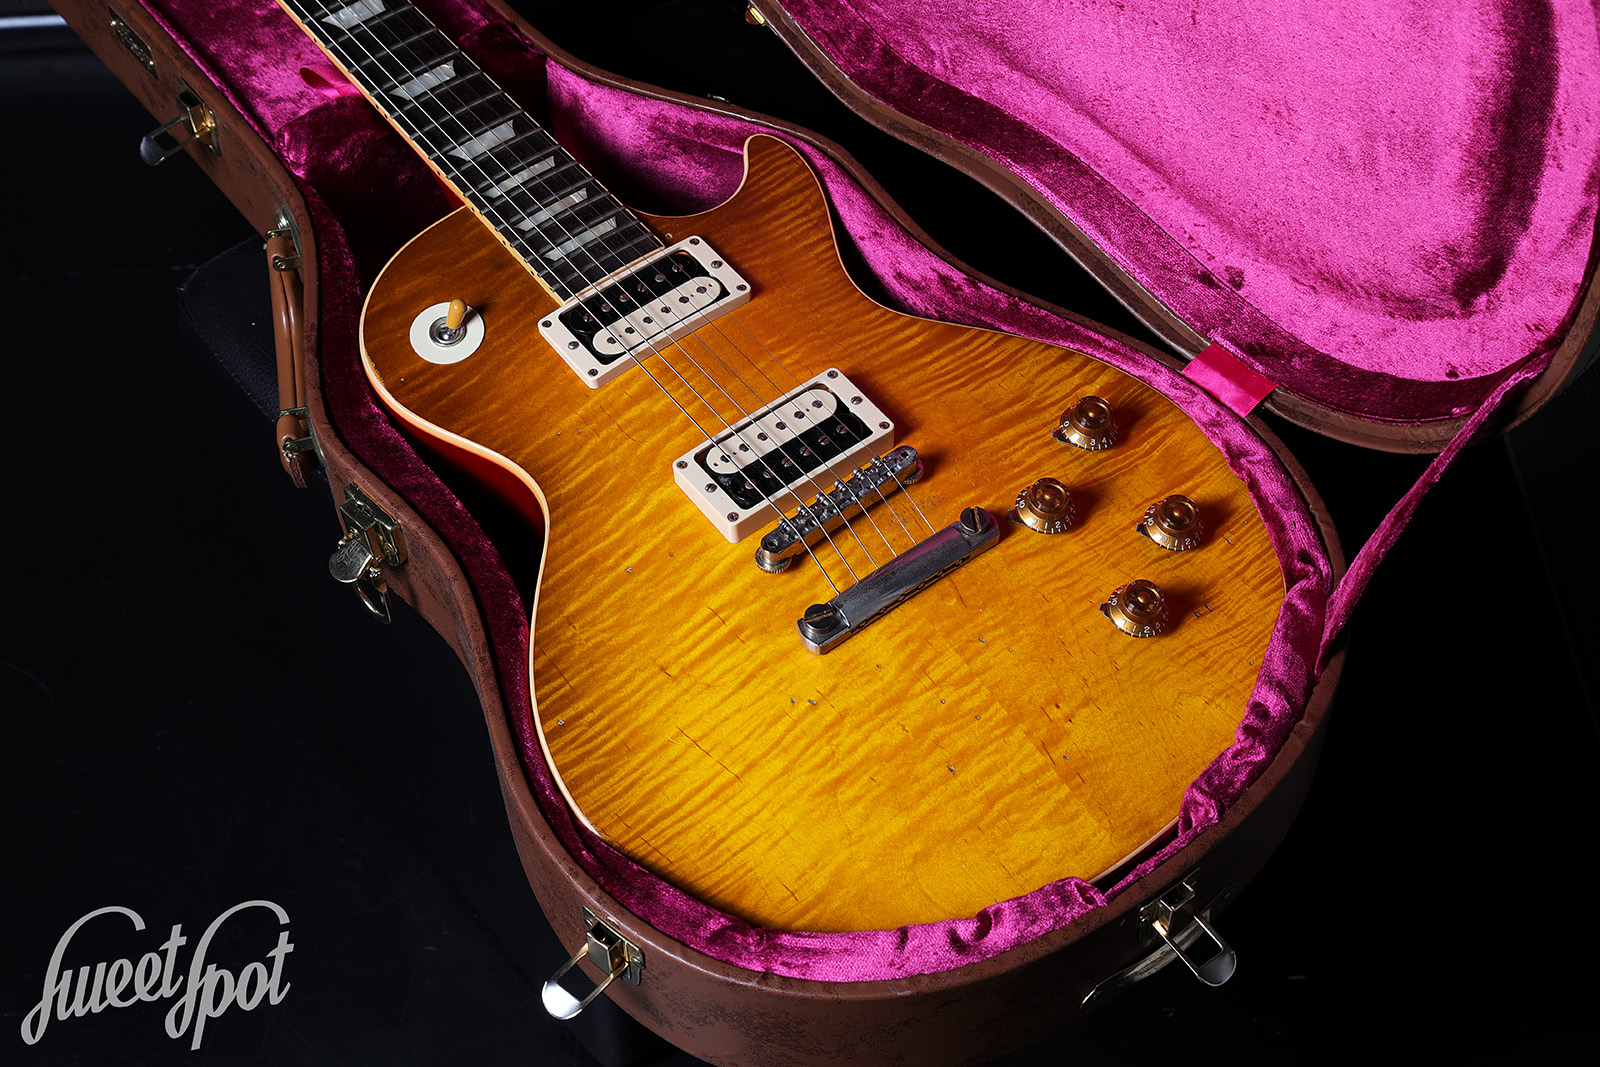 2012 Gibson Les Paul Collectors Choice #4 Sandy Tom Wittrock - Sweetspot  Guitars